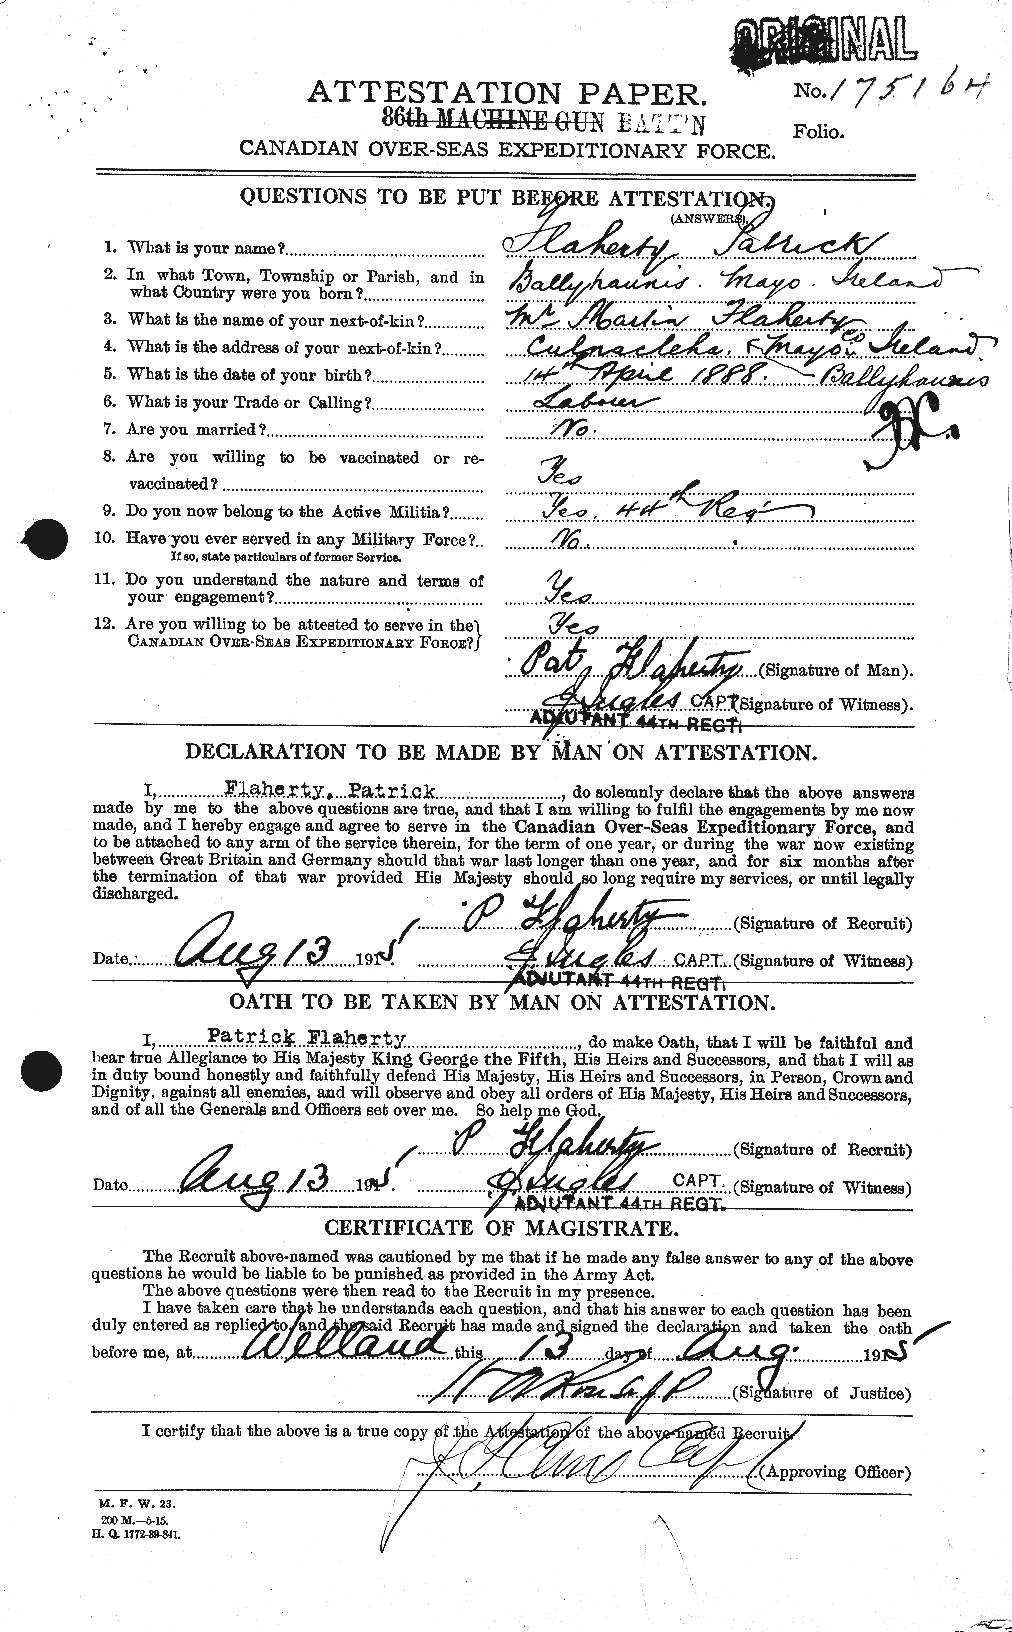 Personnel Records of the First World War - CEF 323376a